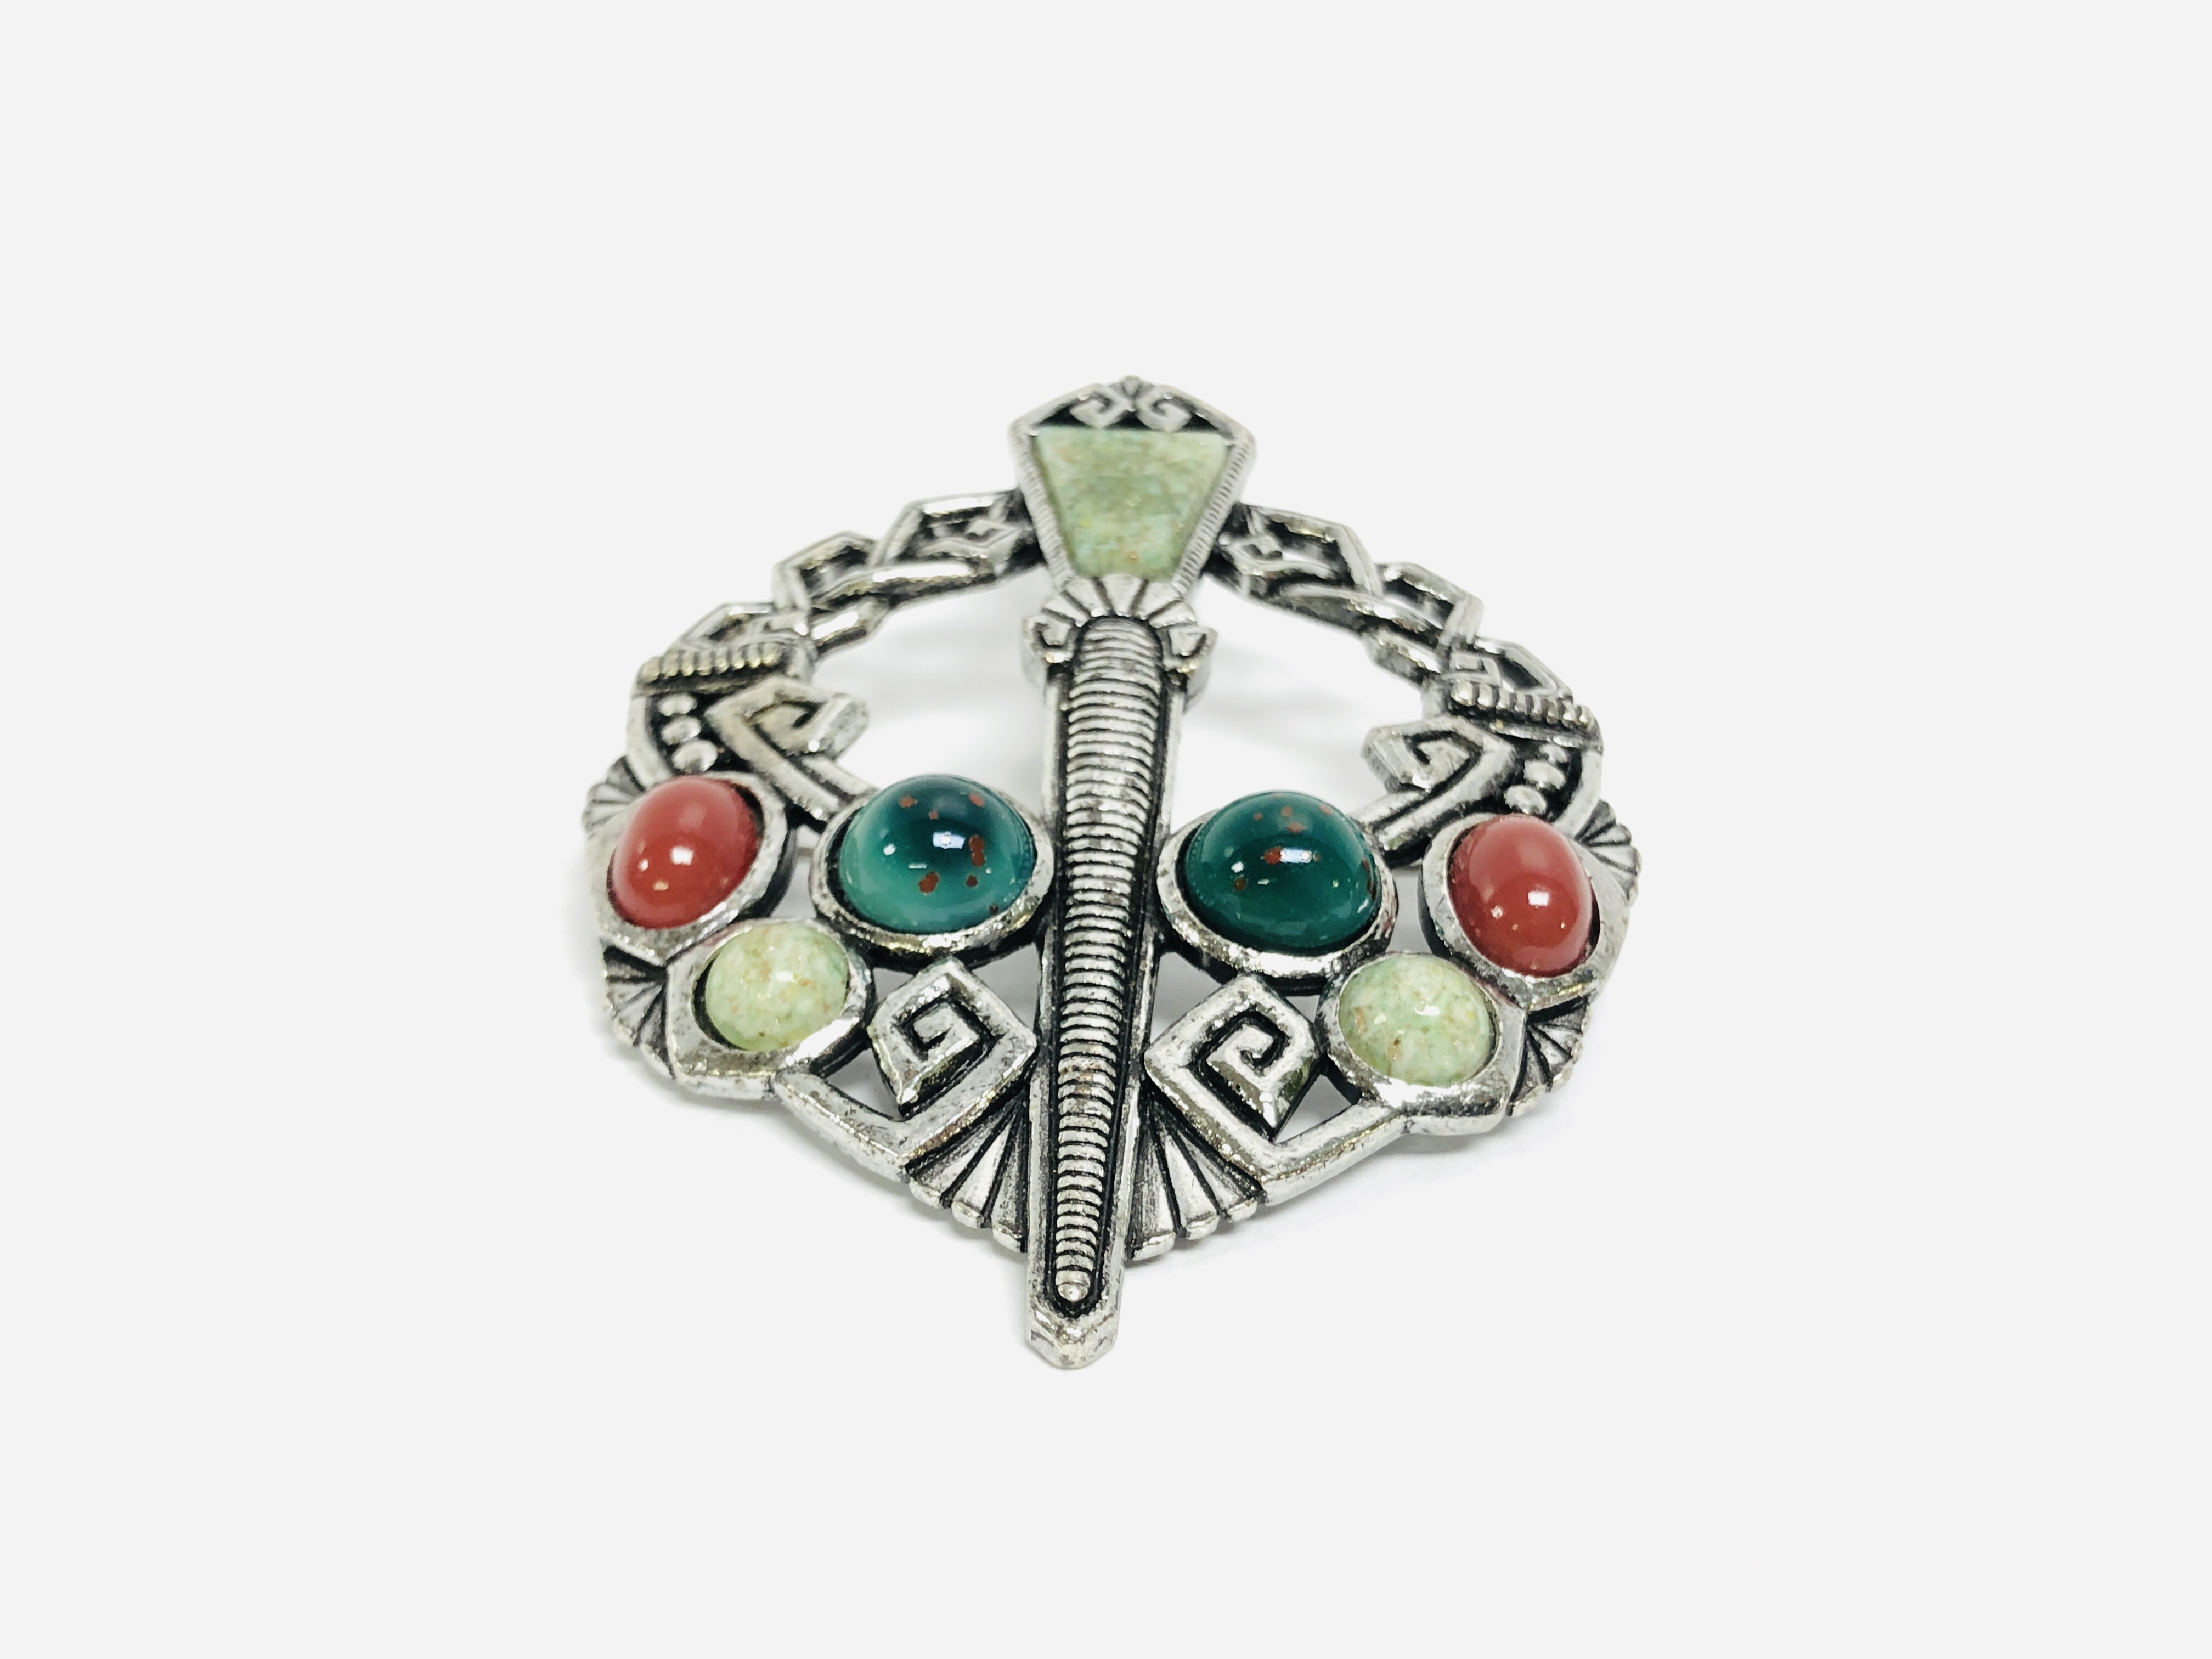 5 X WHITE METAL SCOTTISH CELTIC DESIGN BROOCHES SET WITH AGATE AND VARIOUS HARD STONES - Image 2 of 20